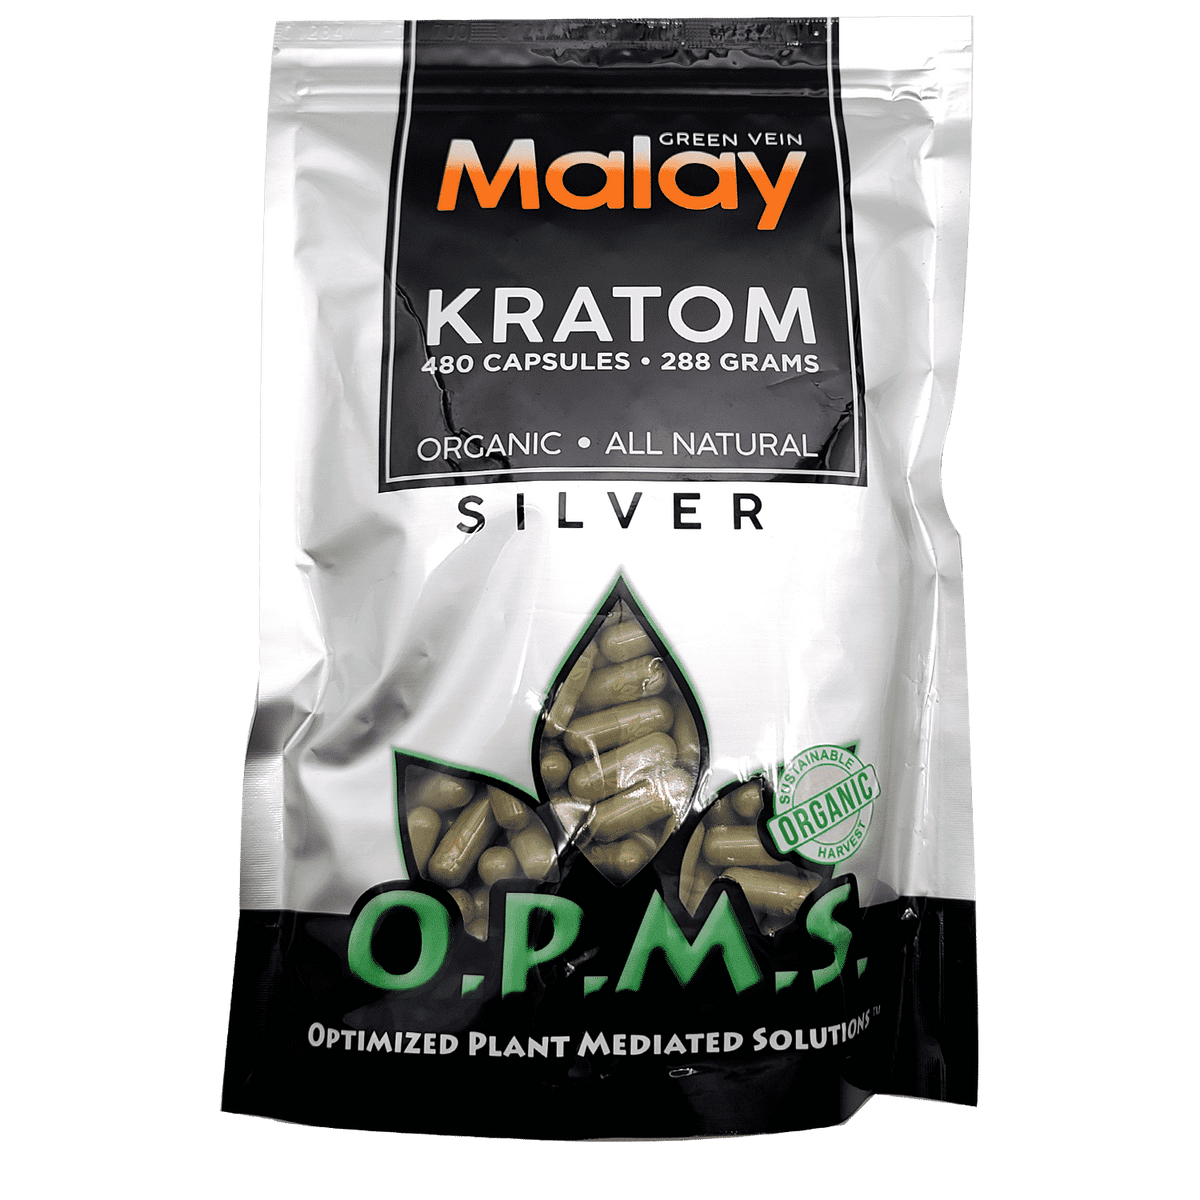 480ct OPMS Silver Green Vein Malay Kratom Extract Capsules